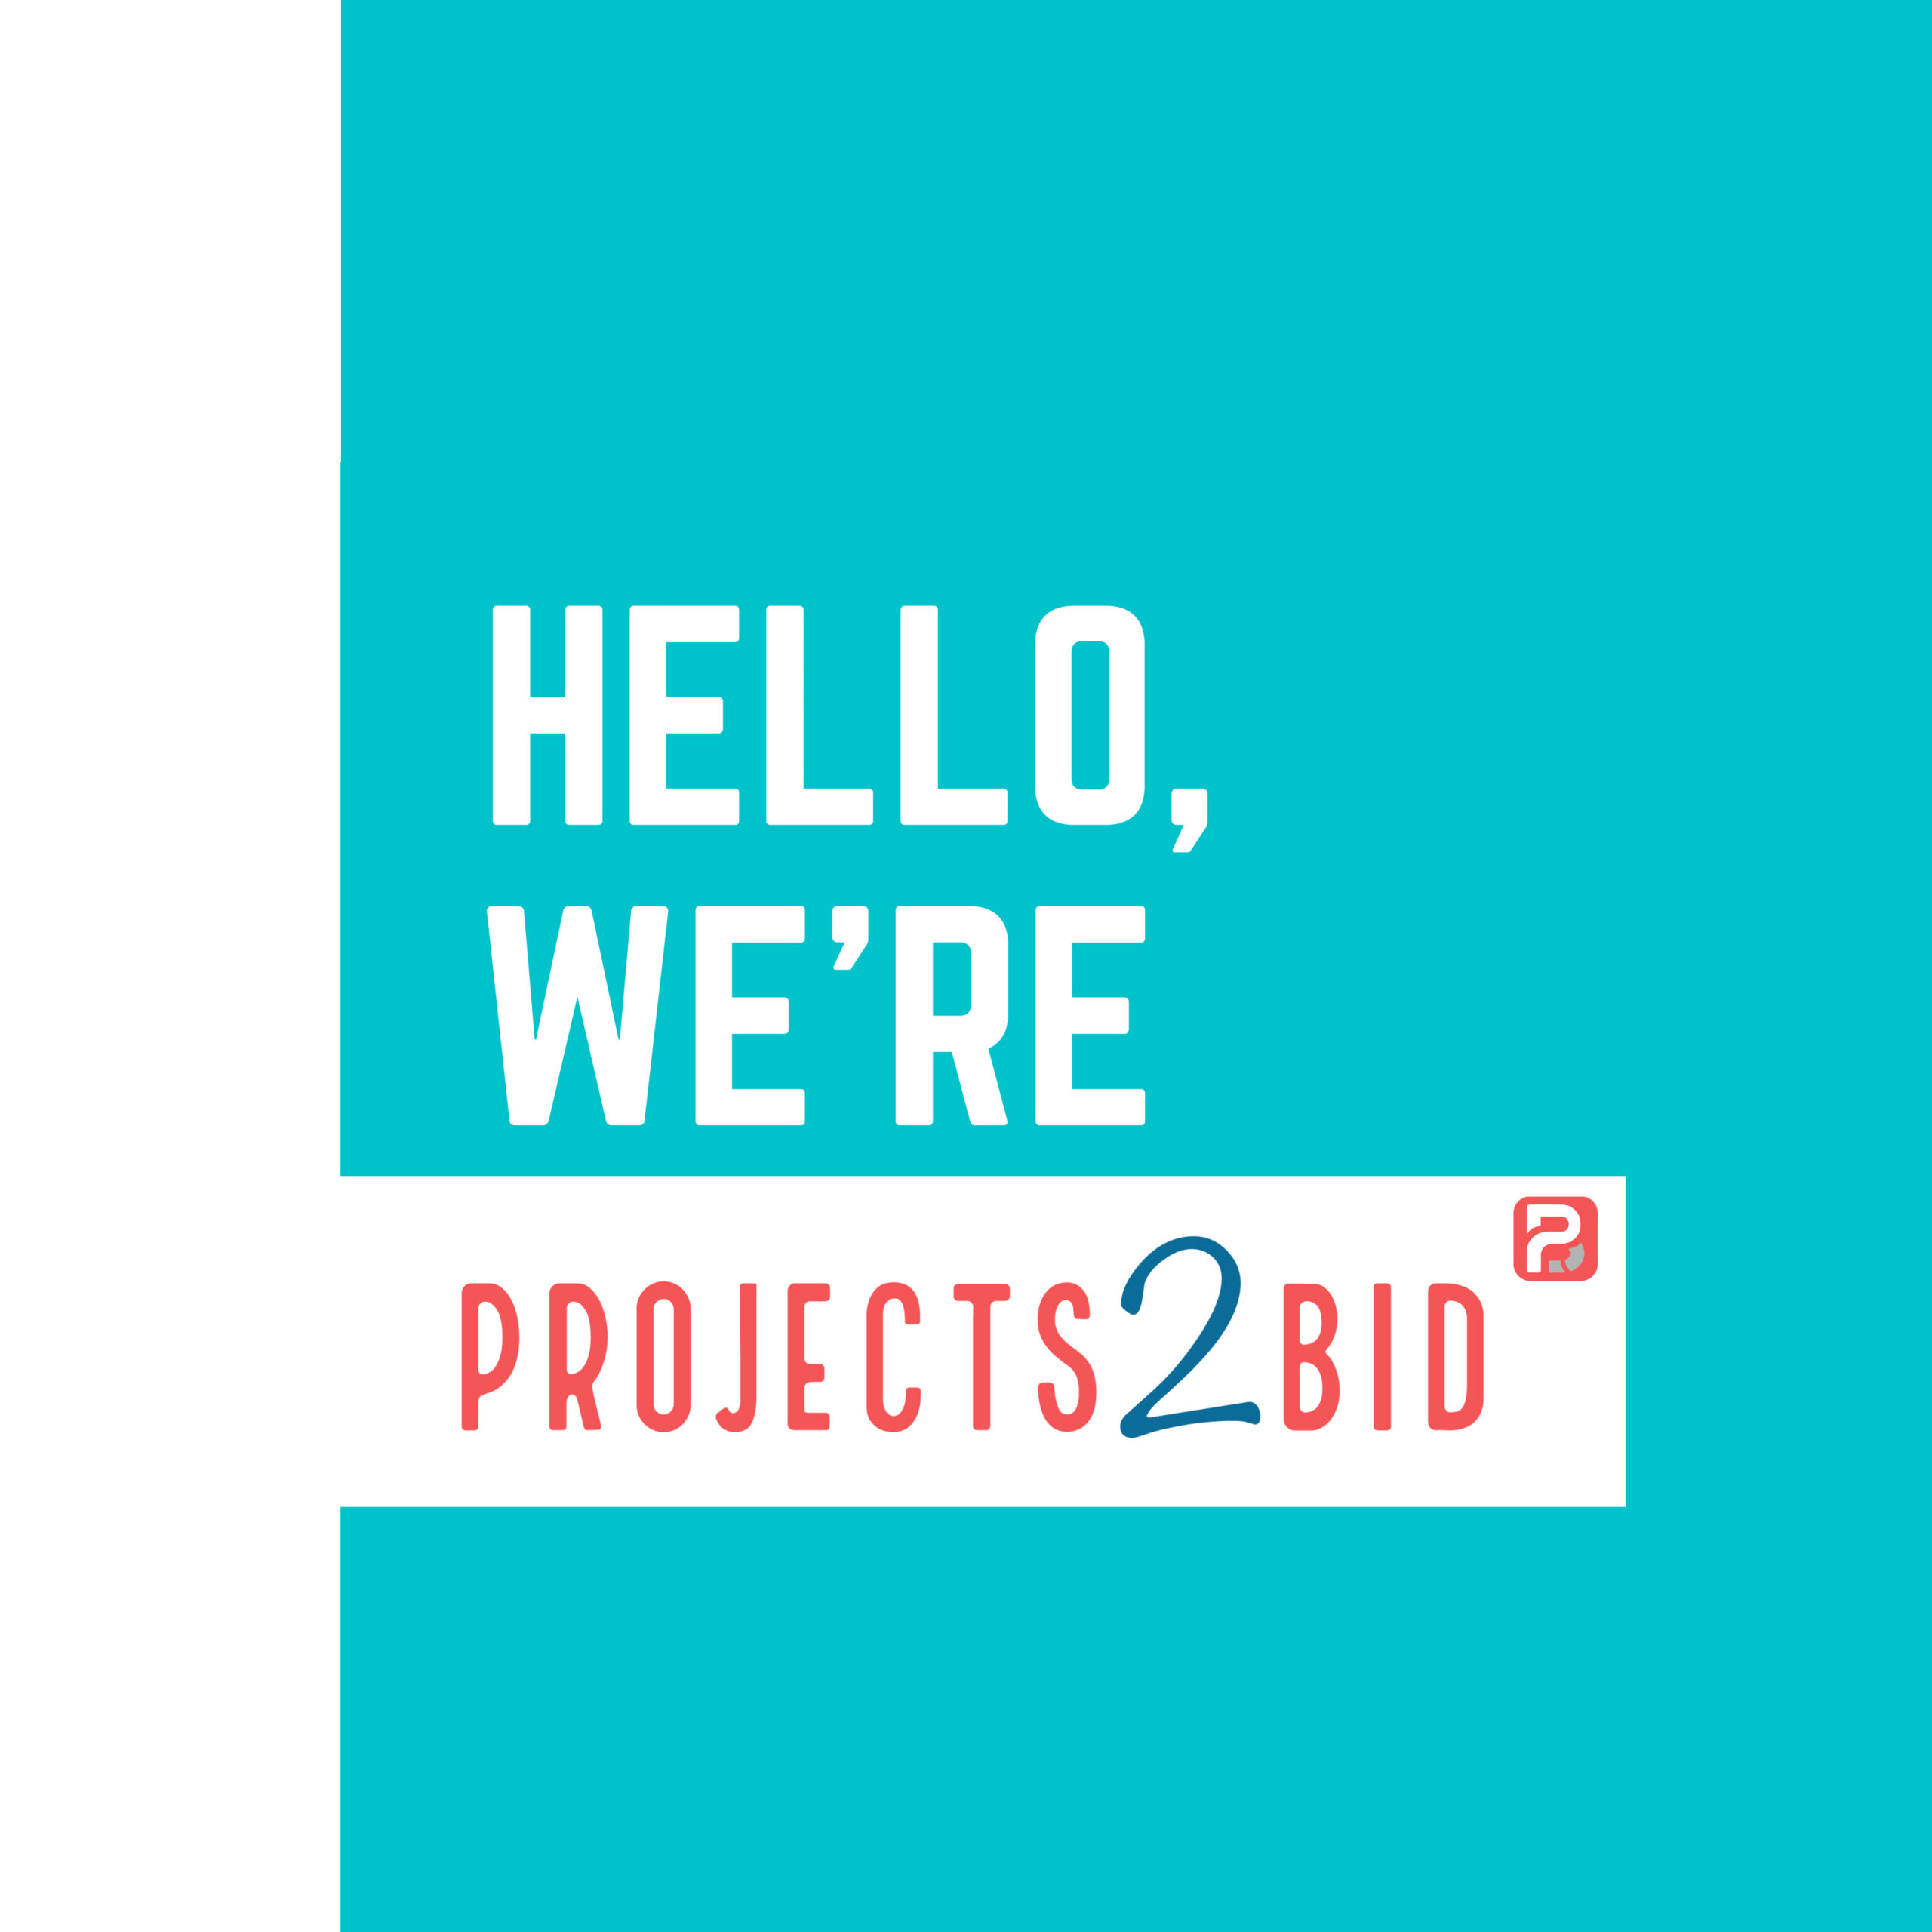 We are projects2bid